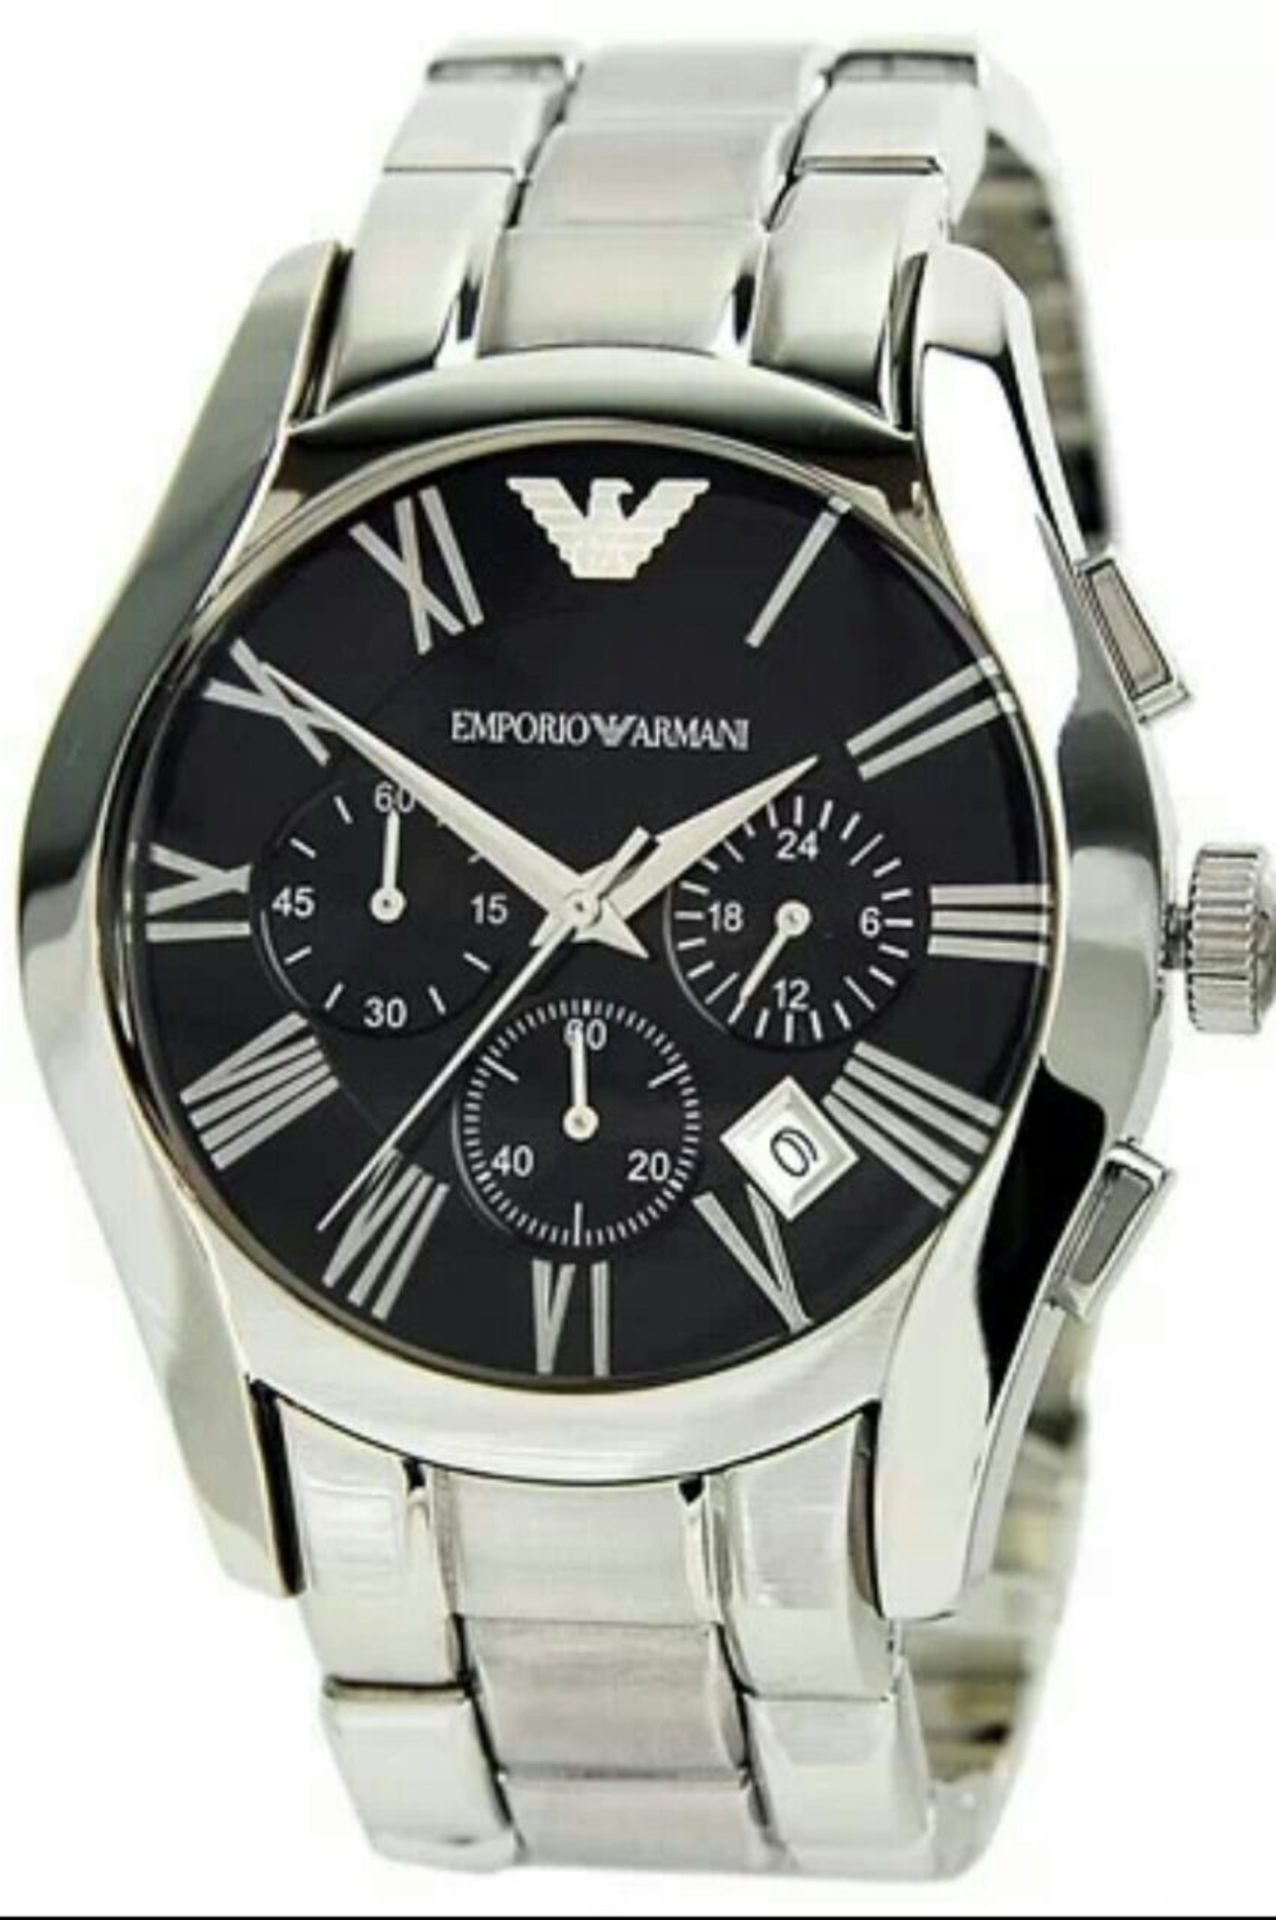 10 X BRAND NEW EMPORIO ARMANI DESIGNER WATCHES, COMPLETE WITH ORIGINAL ARMANI WATCH BOXES, MANUALS & - Image 4 of 10